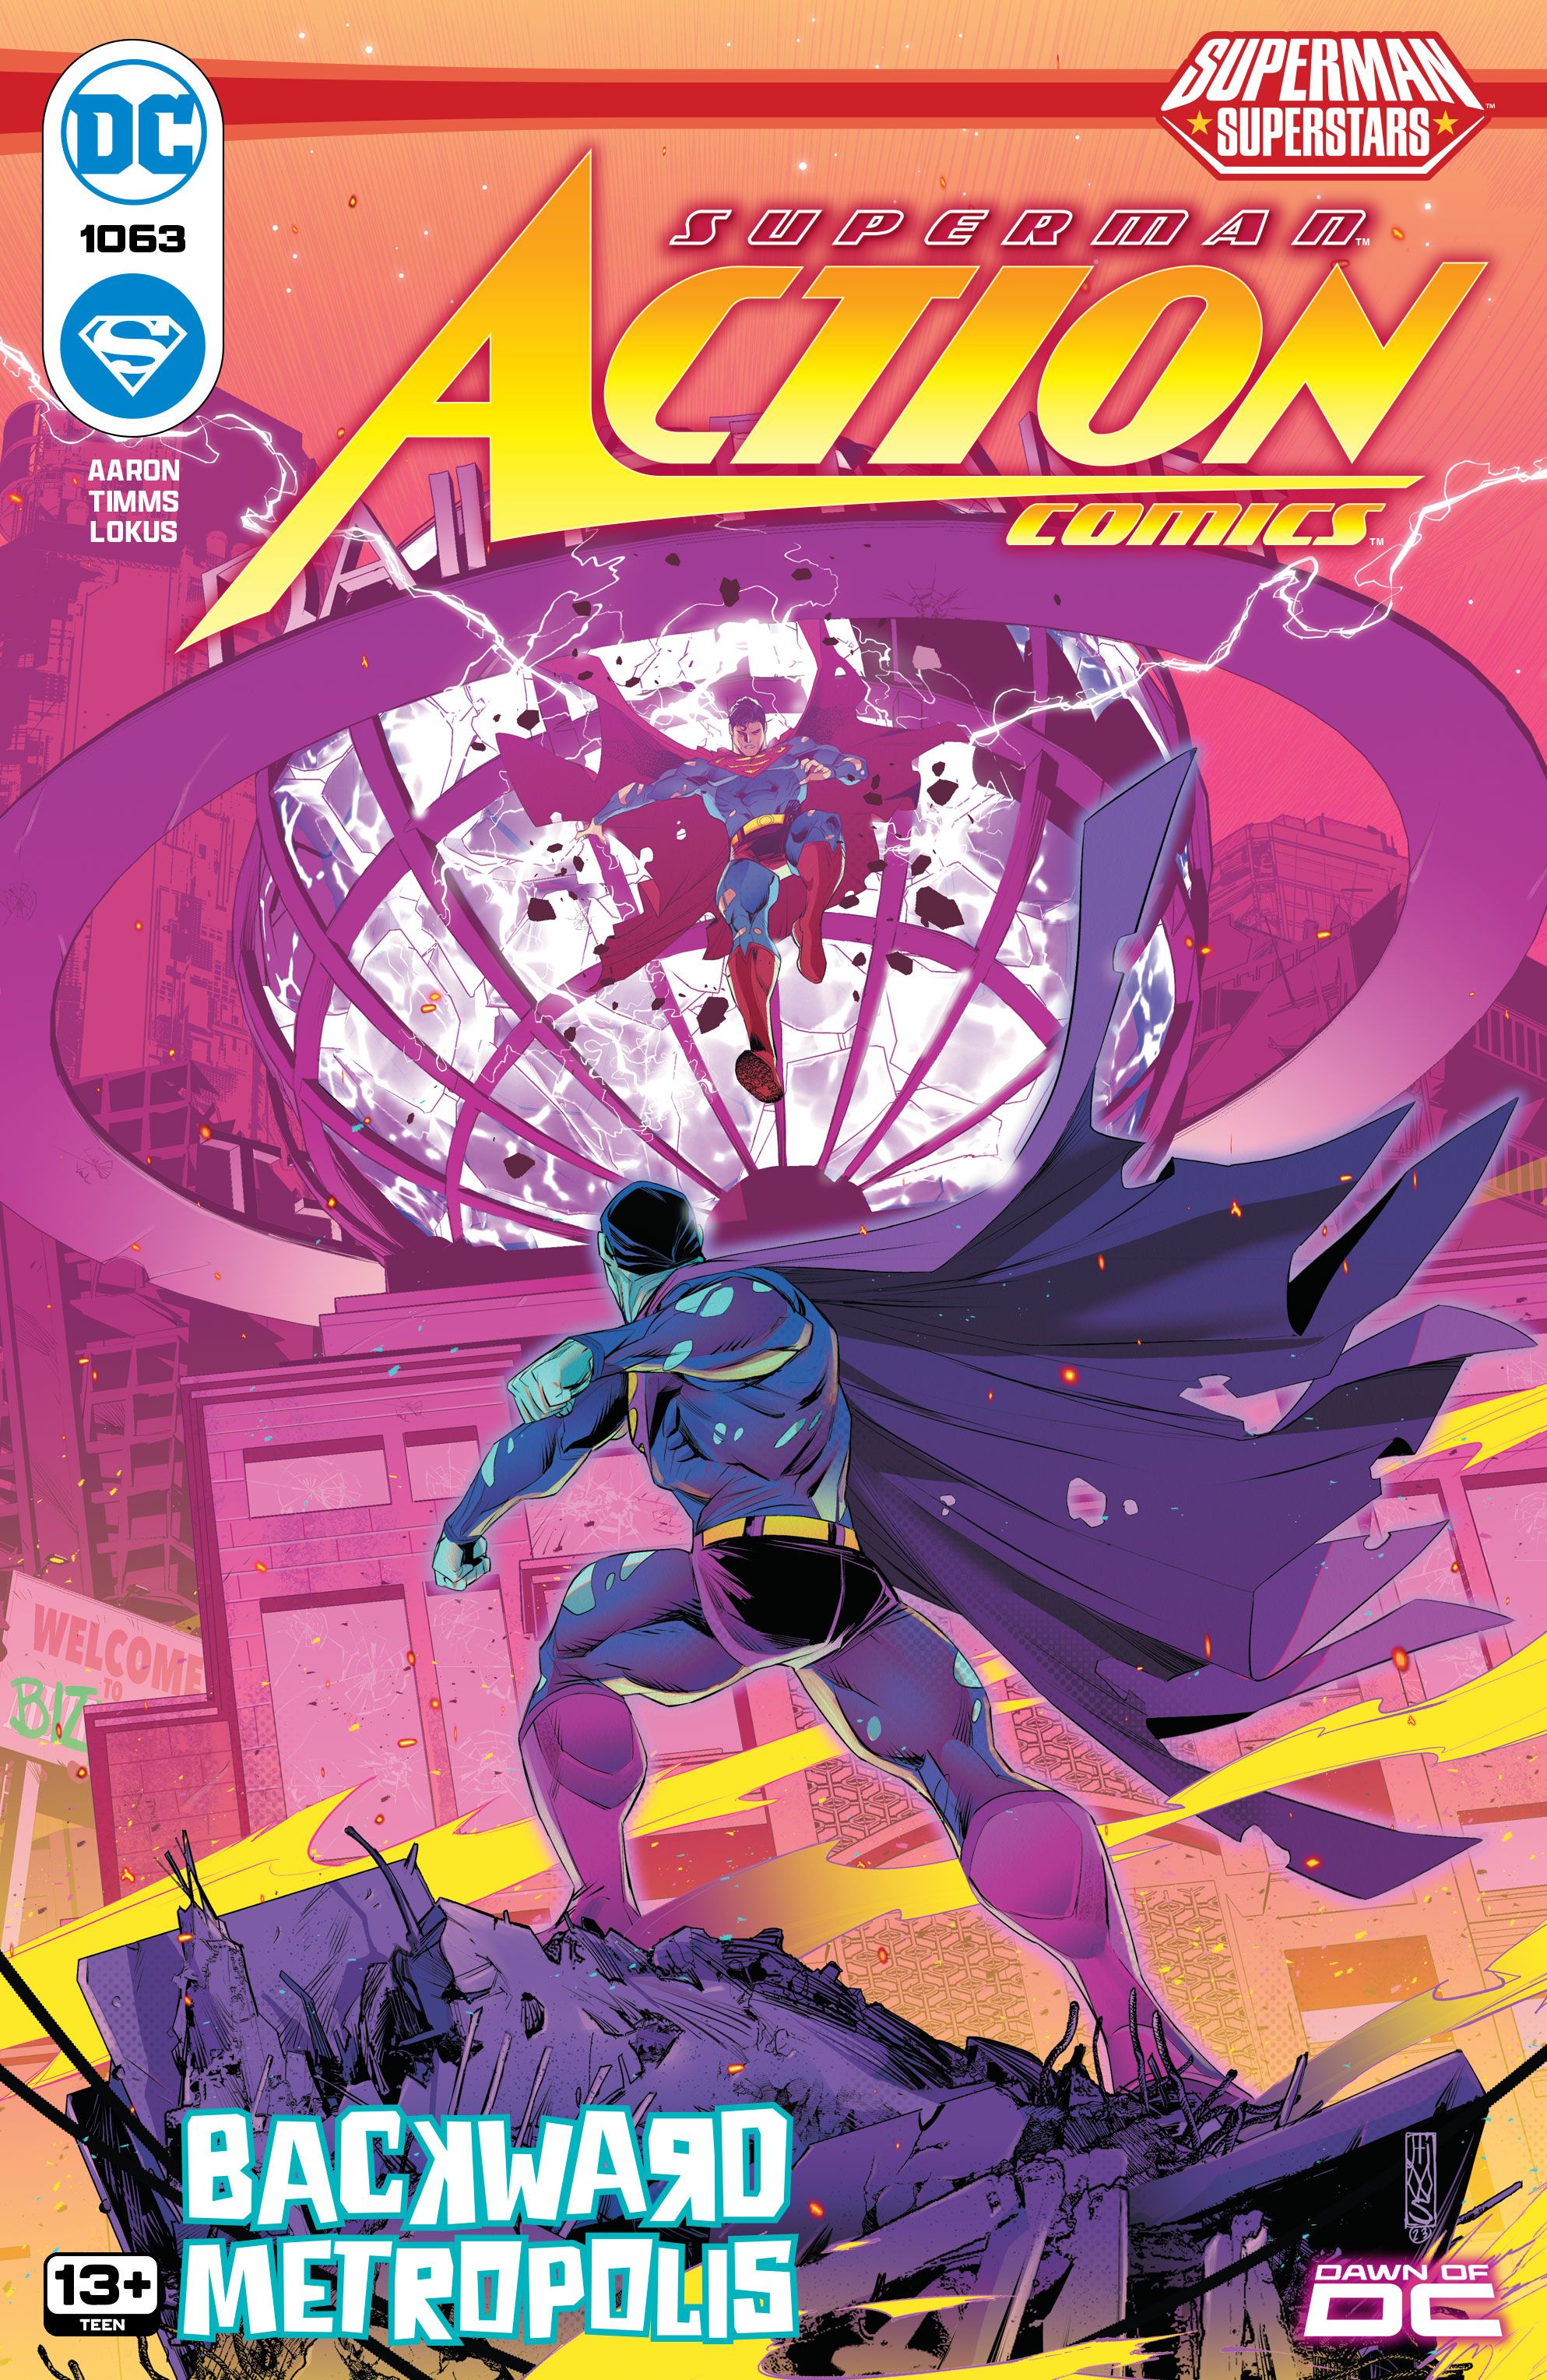 Action Comics 1063 Main Cover: Bizarro punching Superman into the Daily Planet globe.